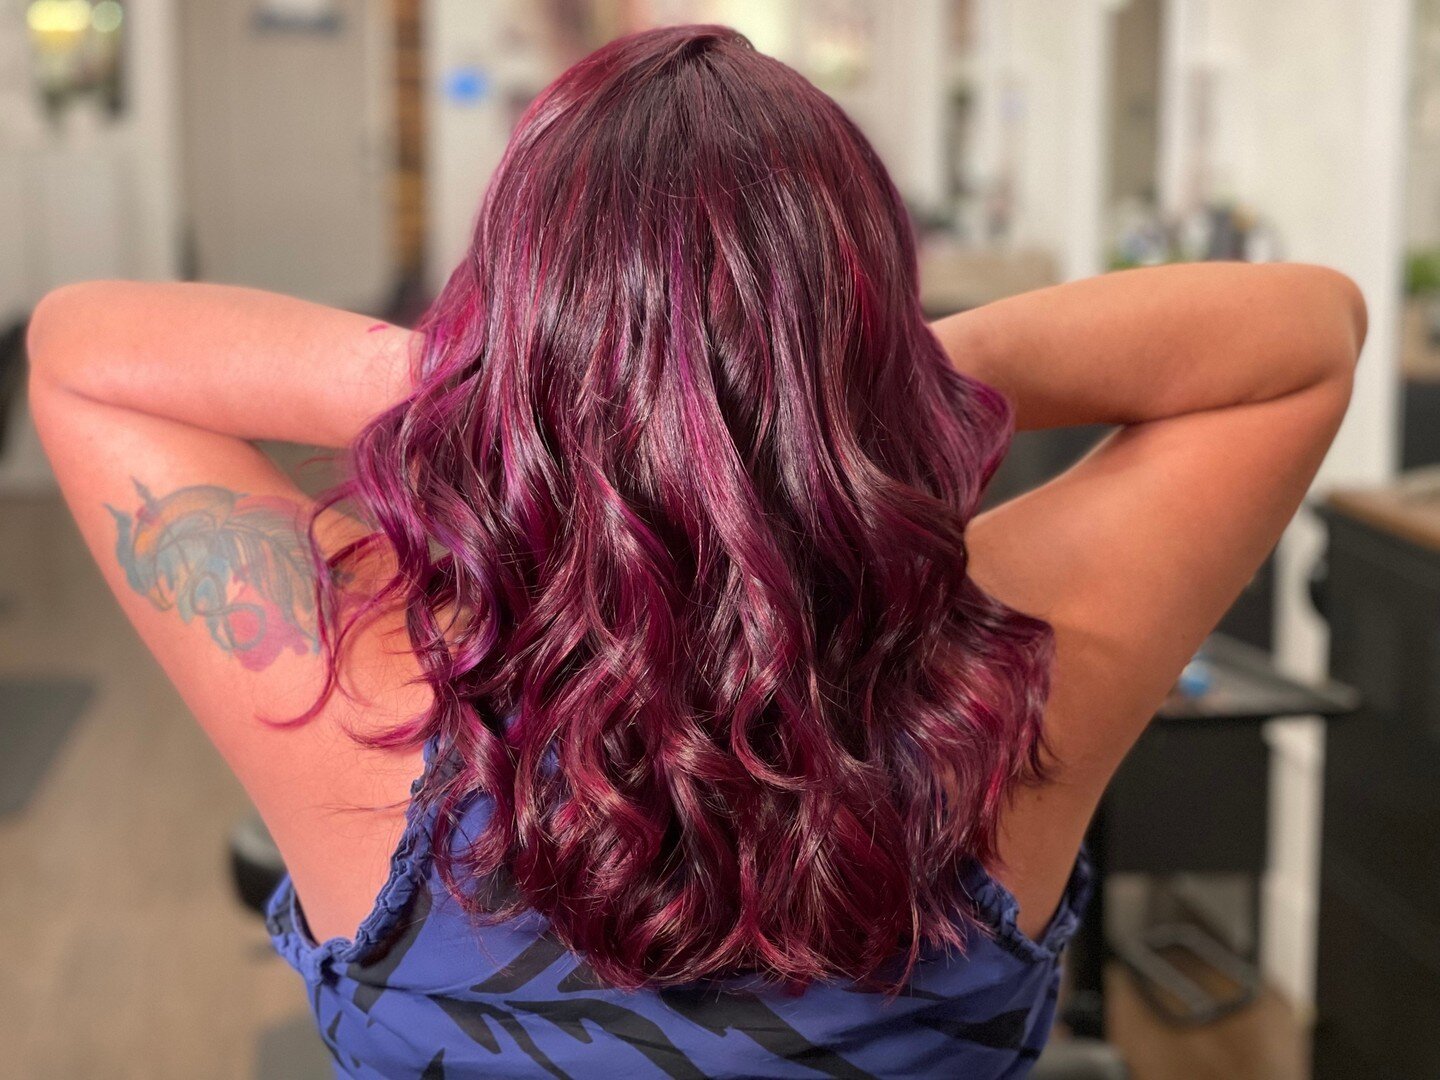 This amazing magenta hair color done by @lexytaylorhair🔮

For appointments: 📞 (337)661-9824
.
.
.
#orlandostylist #orlandosalon #orlandosalons #downtownorlandosalon #colorfulhair #purplehairinspo #pinkhairinspo #purplehair #balaygeorlando #orlandoh